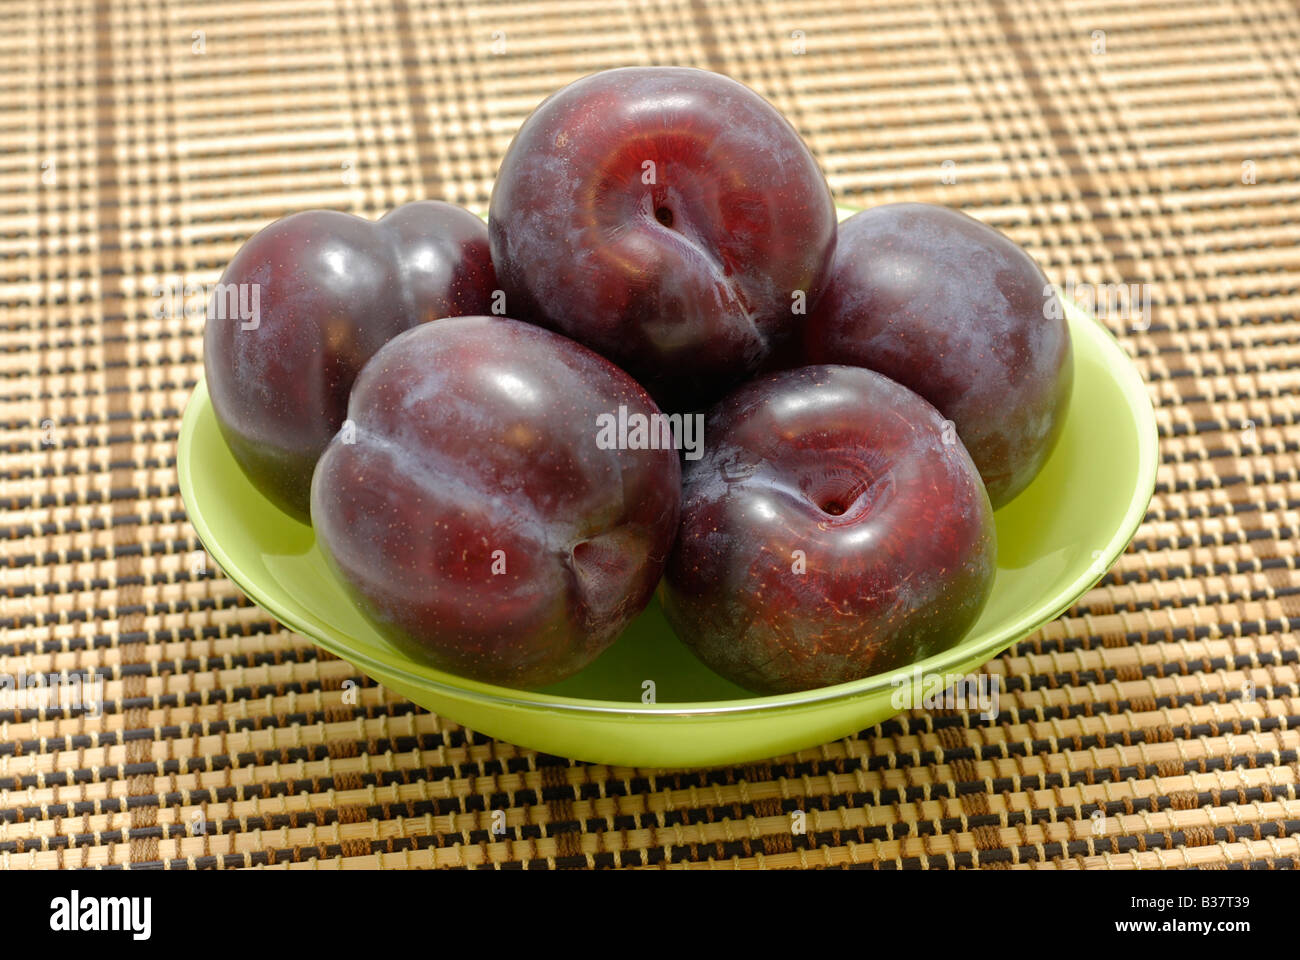 Plums in Plate Stock Photo